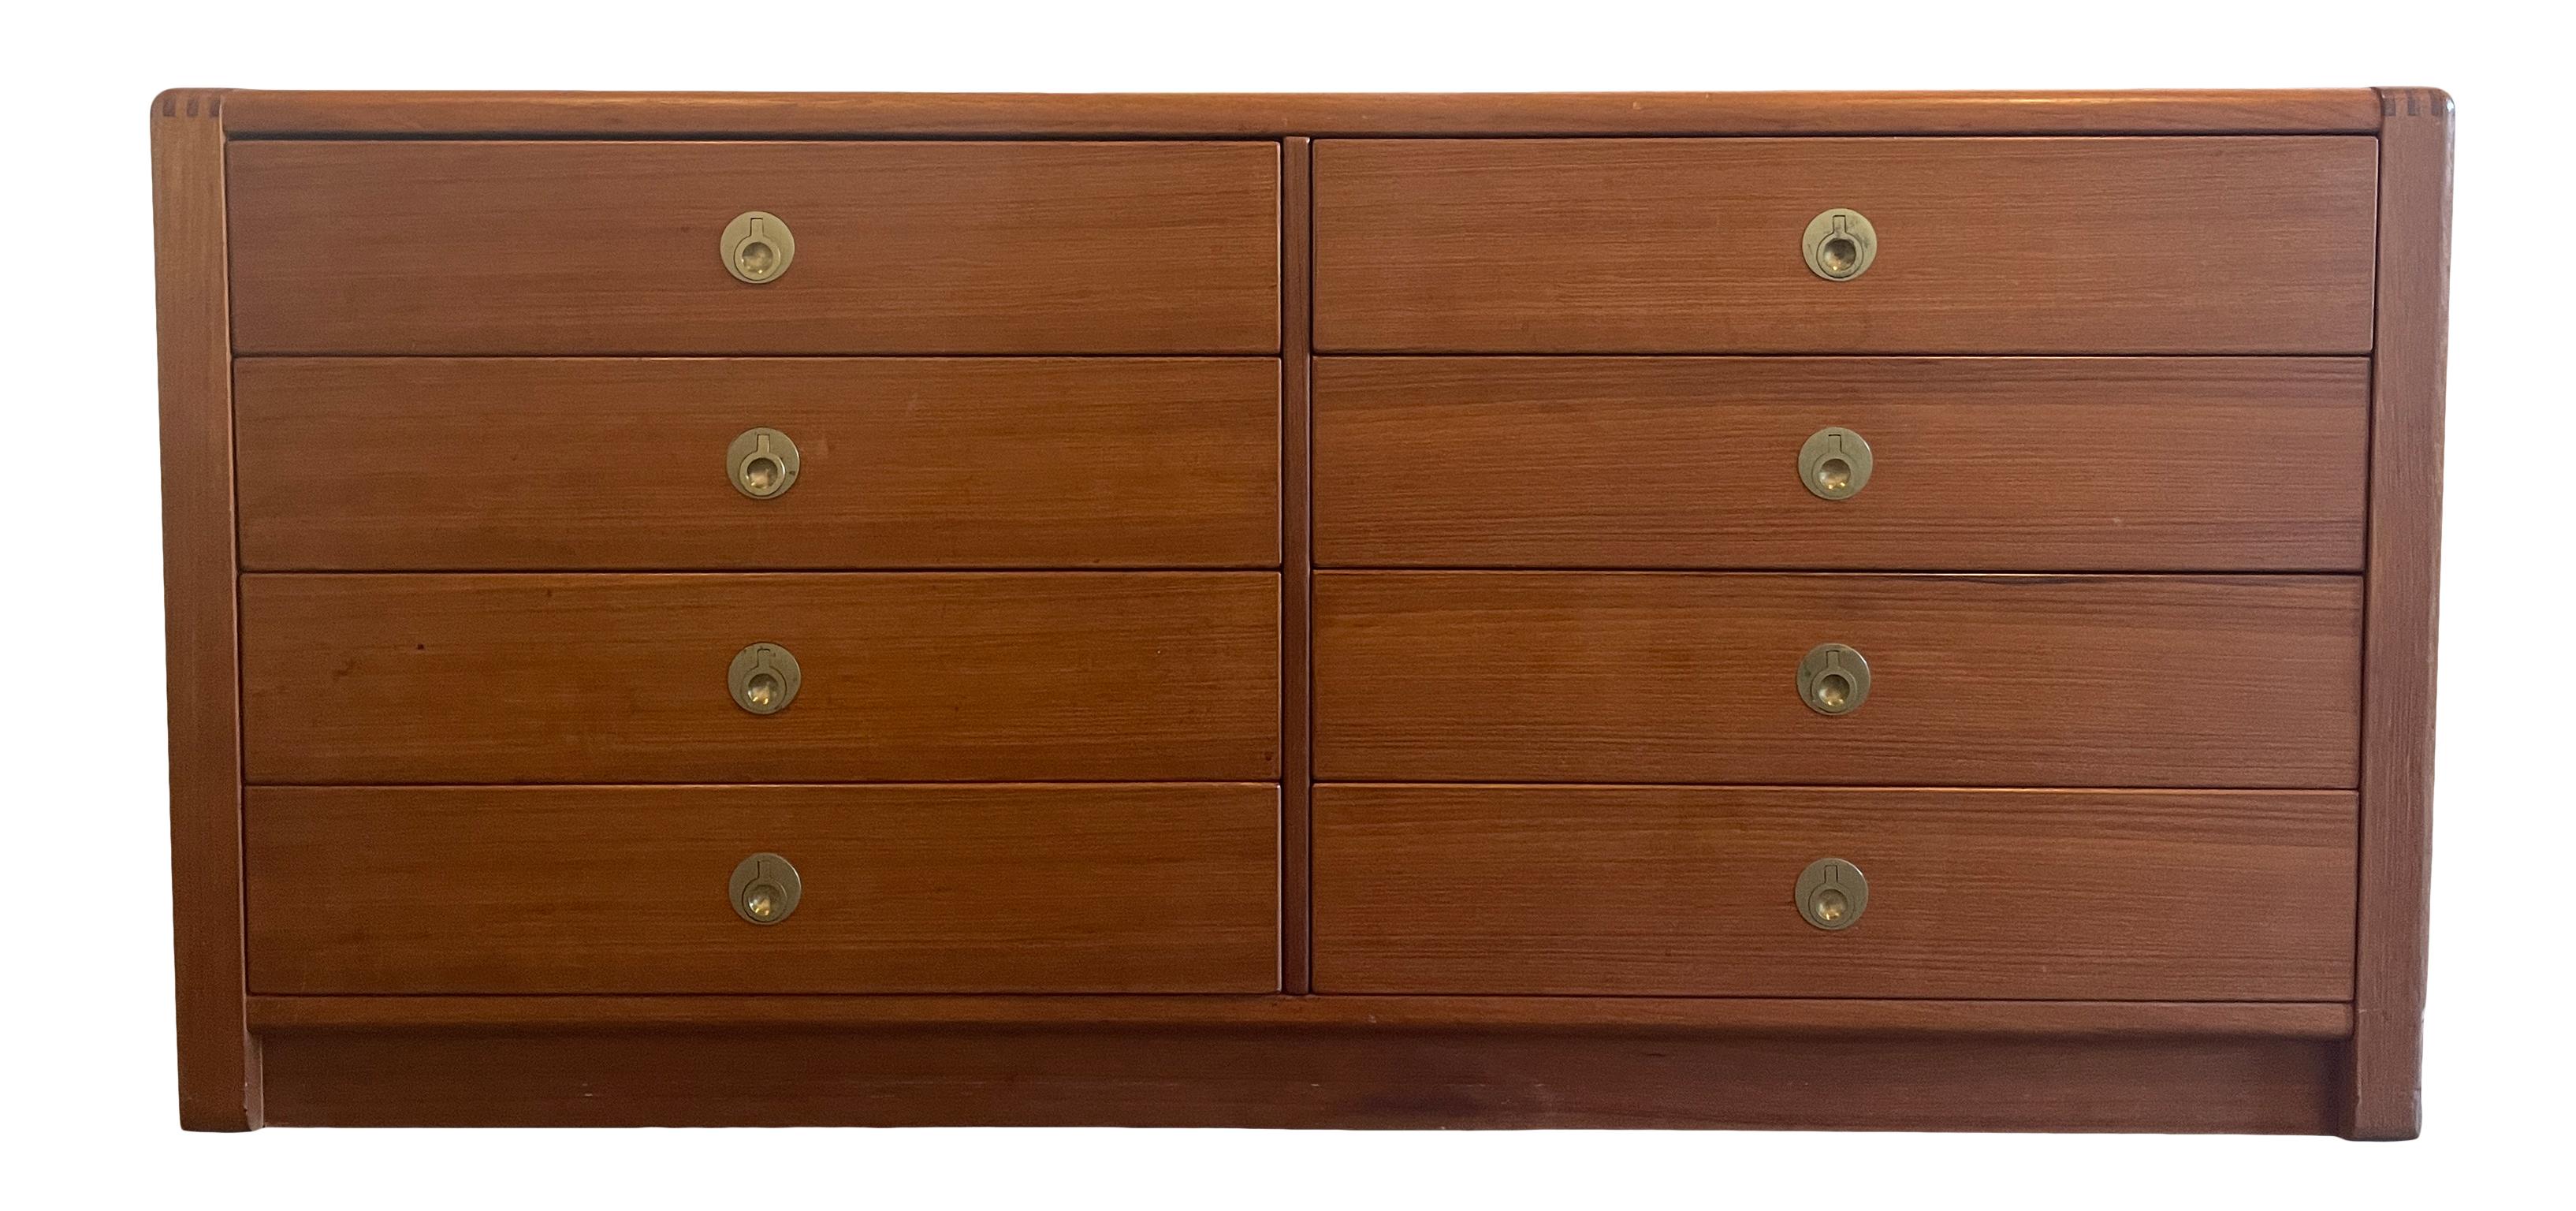 Mid-Century Modern teak tall 8 drawer low dresser brass finger pulls. Very nice construction all drawers are clean inside and out and slide smooth. Very unique brass finger pulls. Located in Brooklyn NYC.